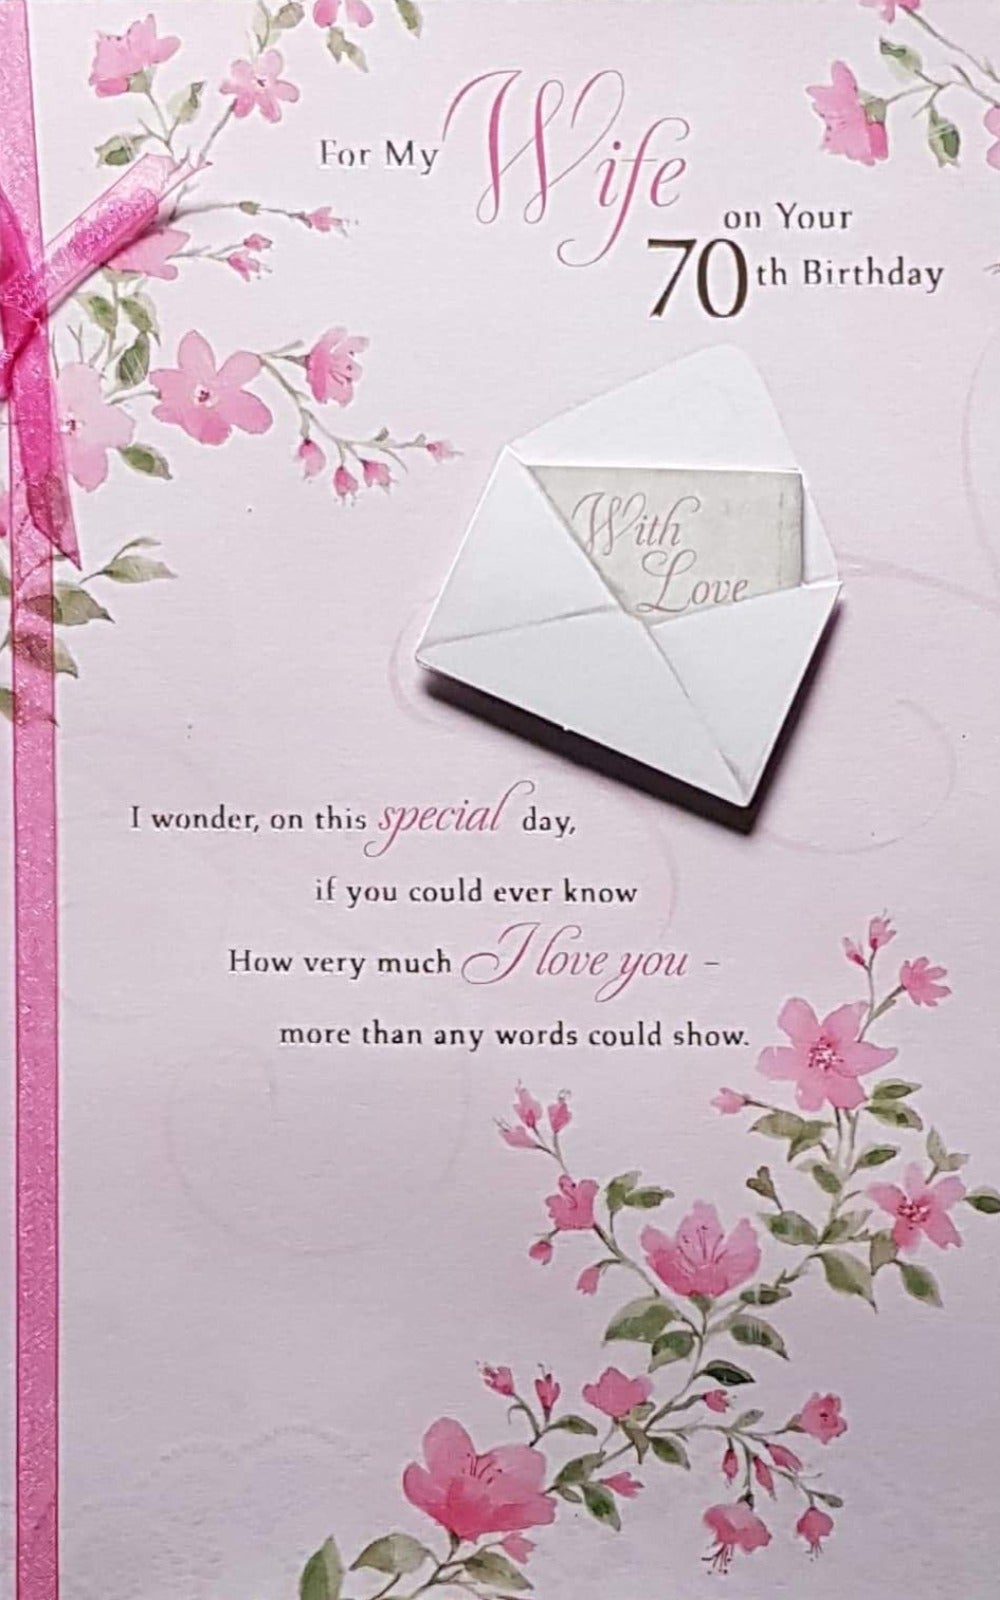 Birthday Card - Wife / 70th Birthday & A Pink Ribbon Tied To The Card